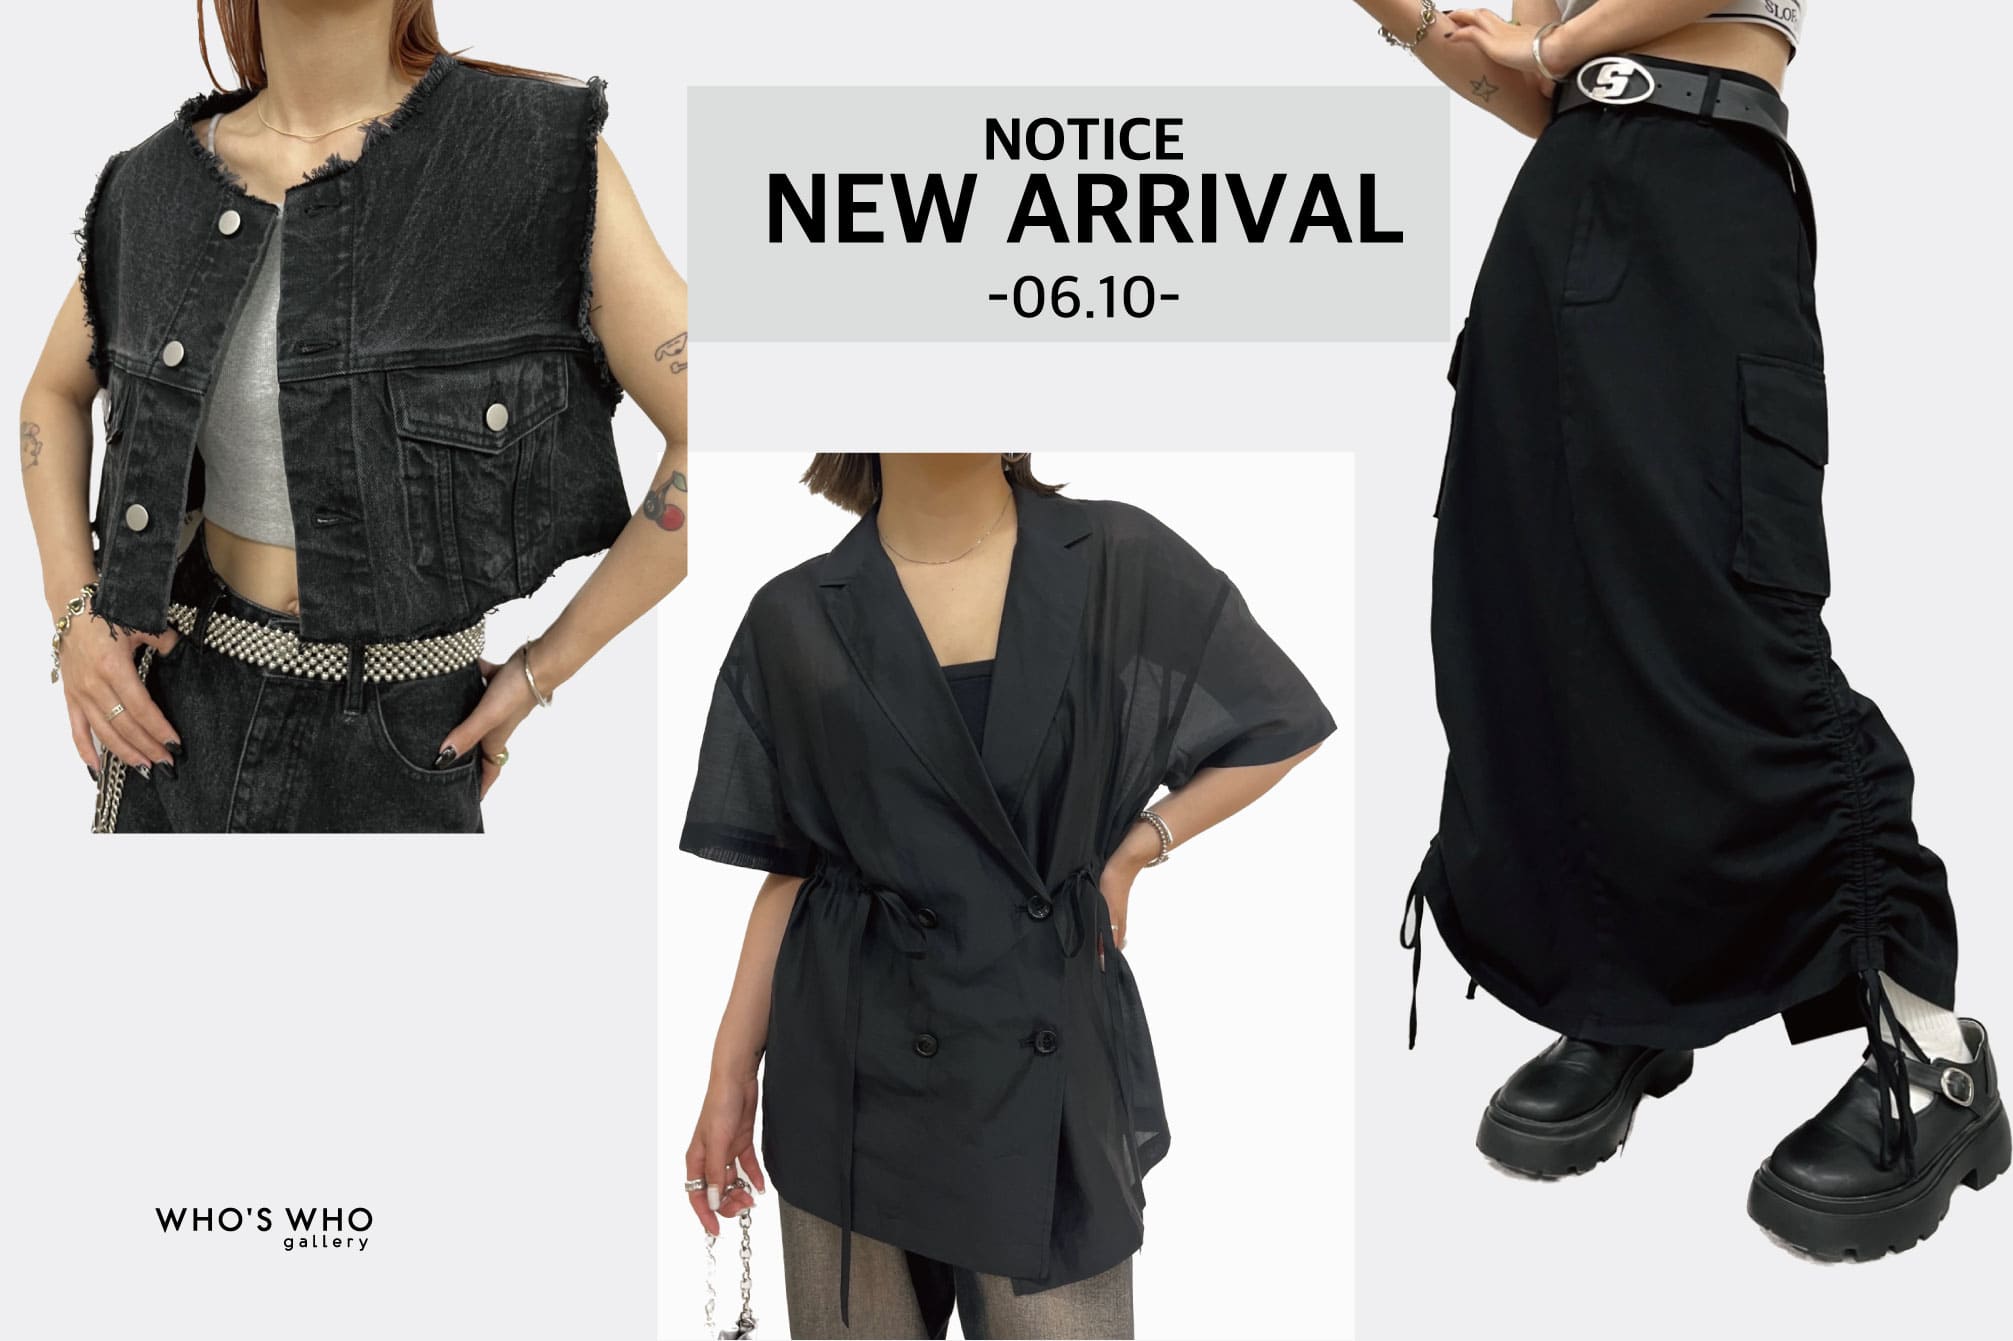 WHO’S WHO gallery 【NEW ARRIVAL NOTICE -06.10-】